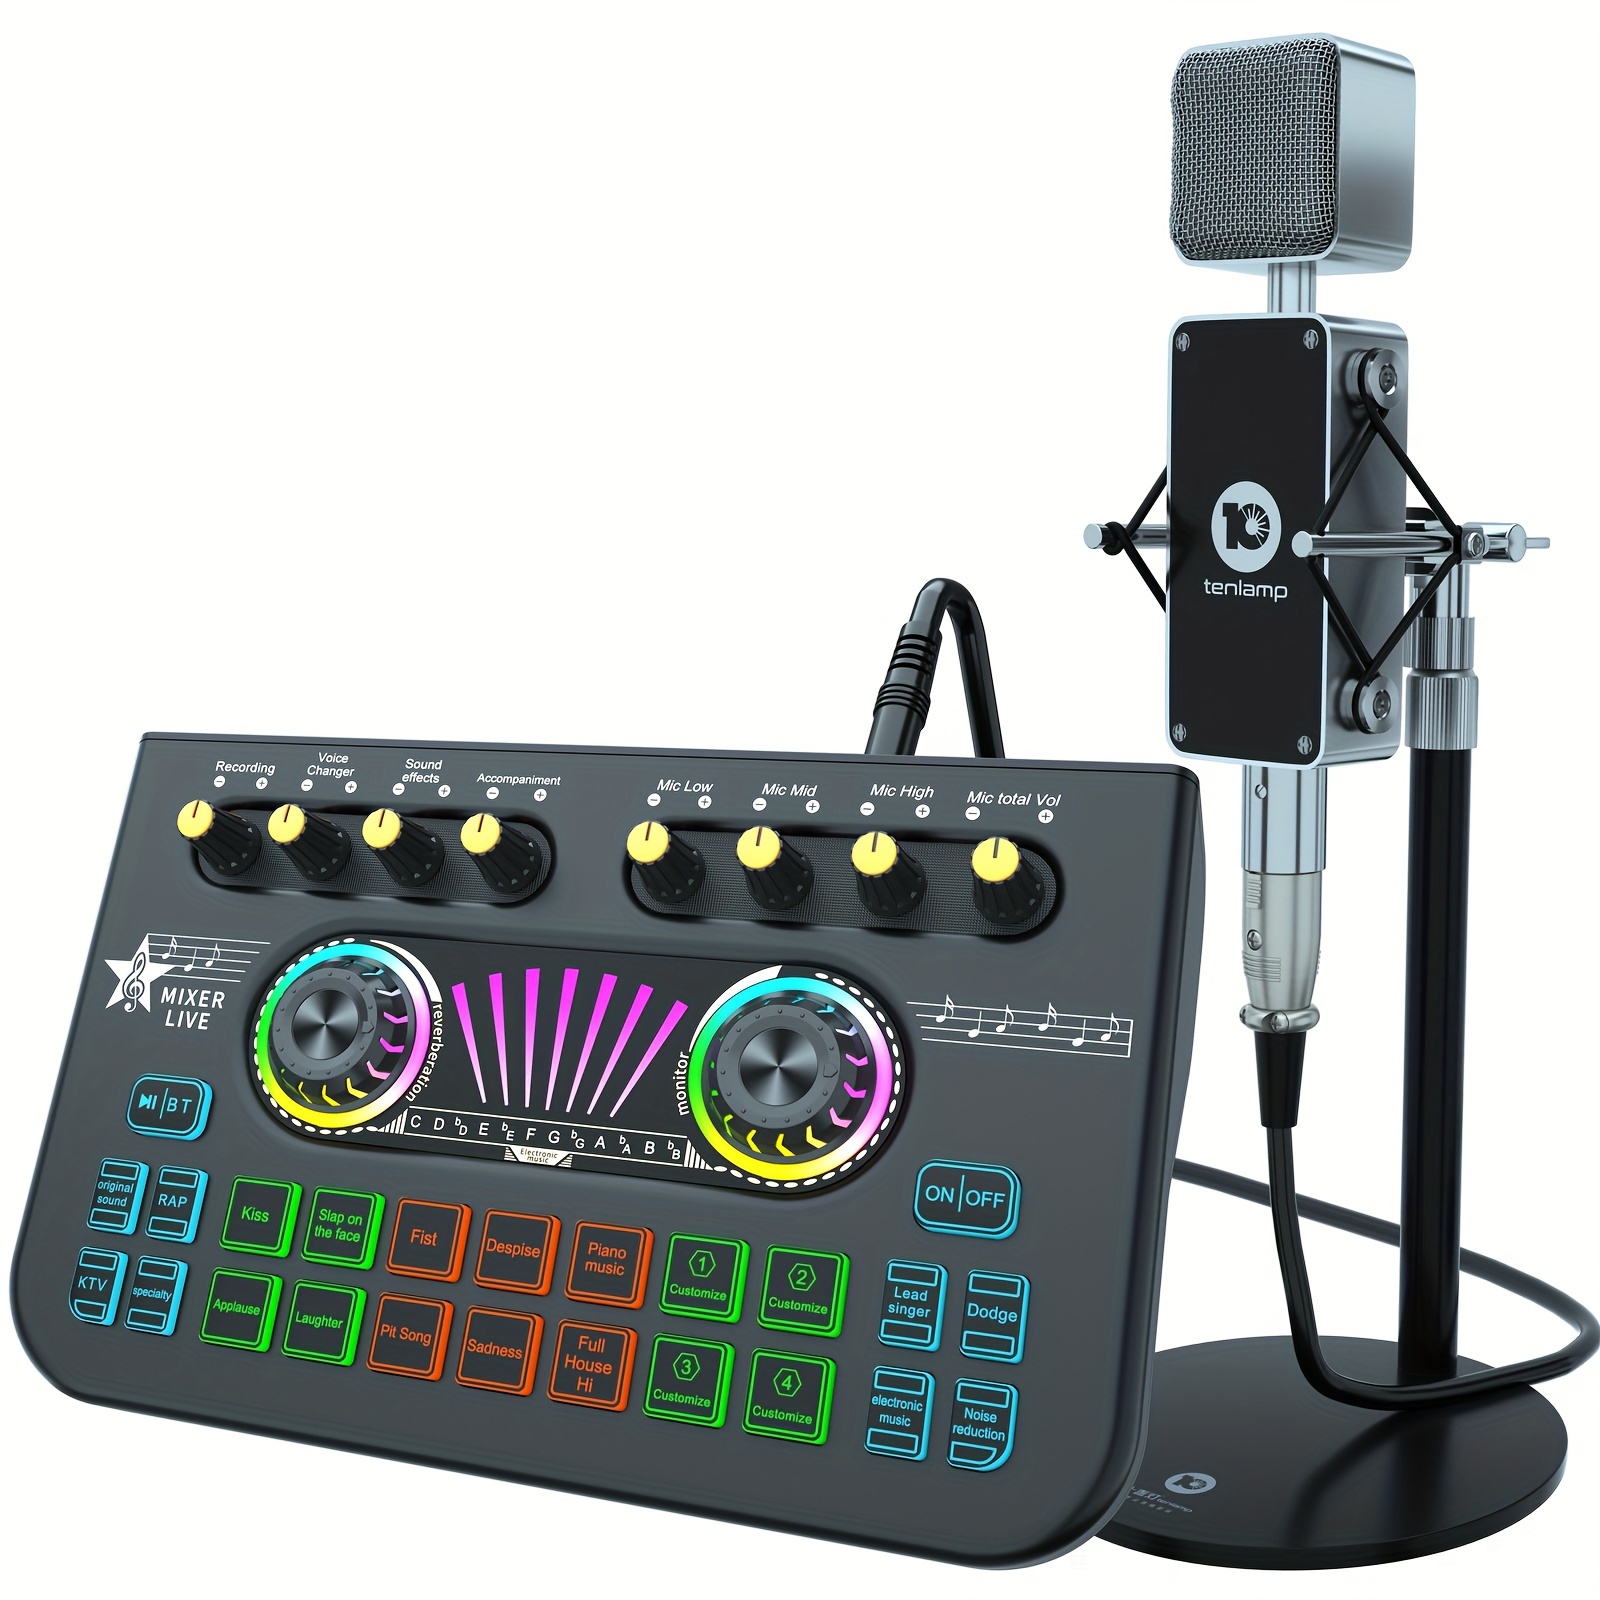 

Audio Interface With Mixer & Vocal Effects, Kit With Live Sound Card And Adjustable Mic Stand For Studio Recording Vocals, Voice Overs, Streaming Broadcast